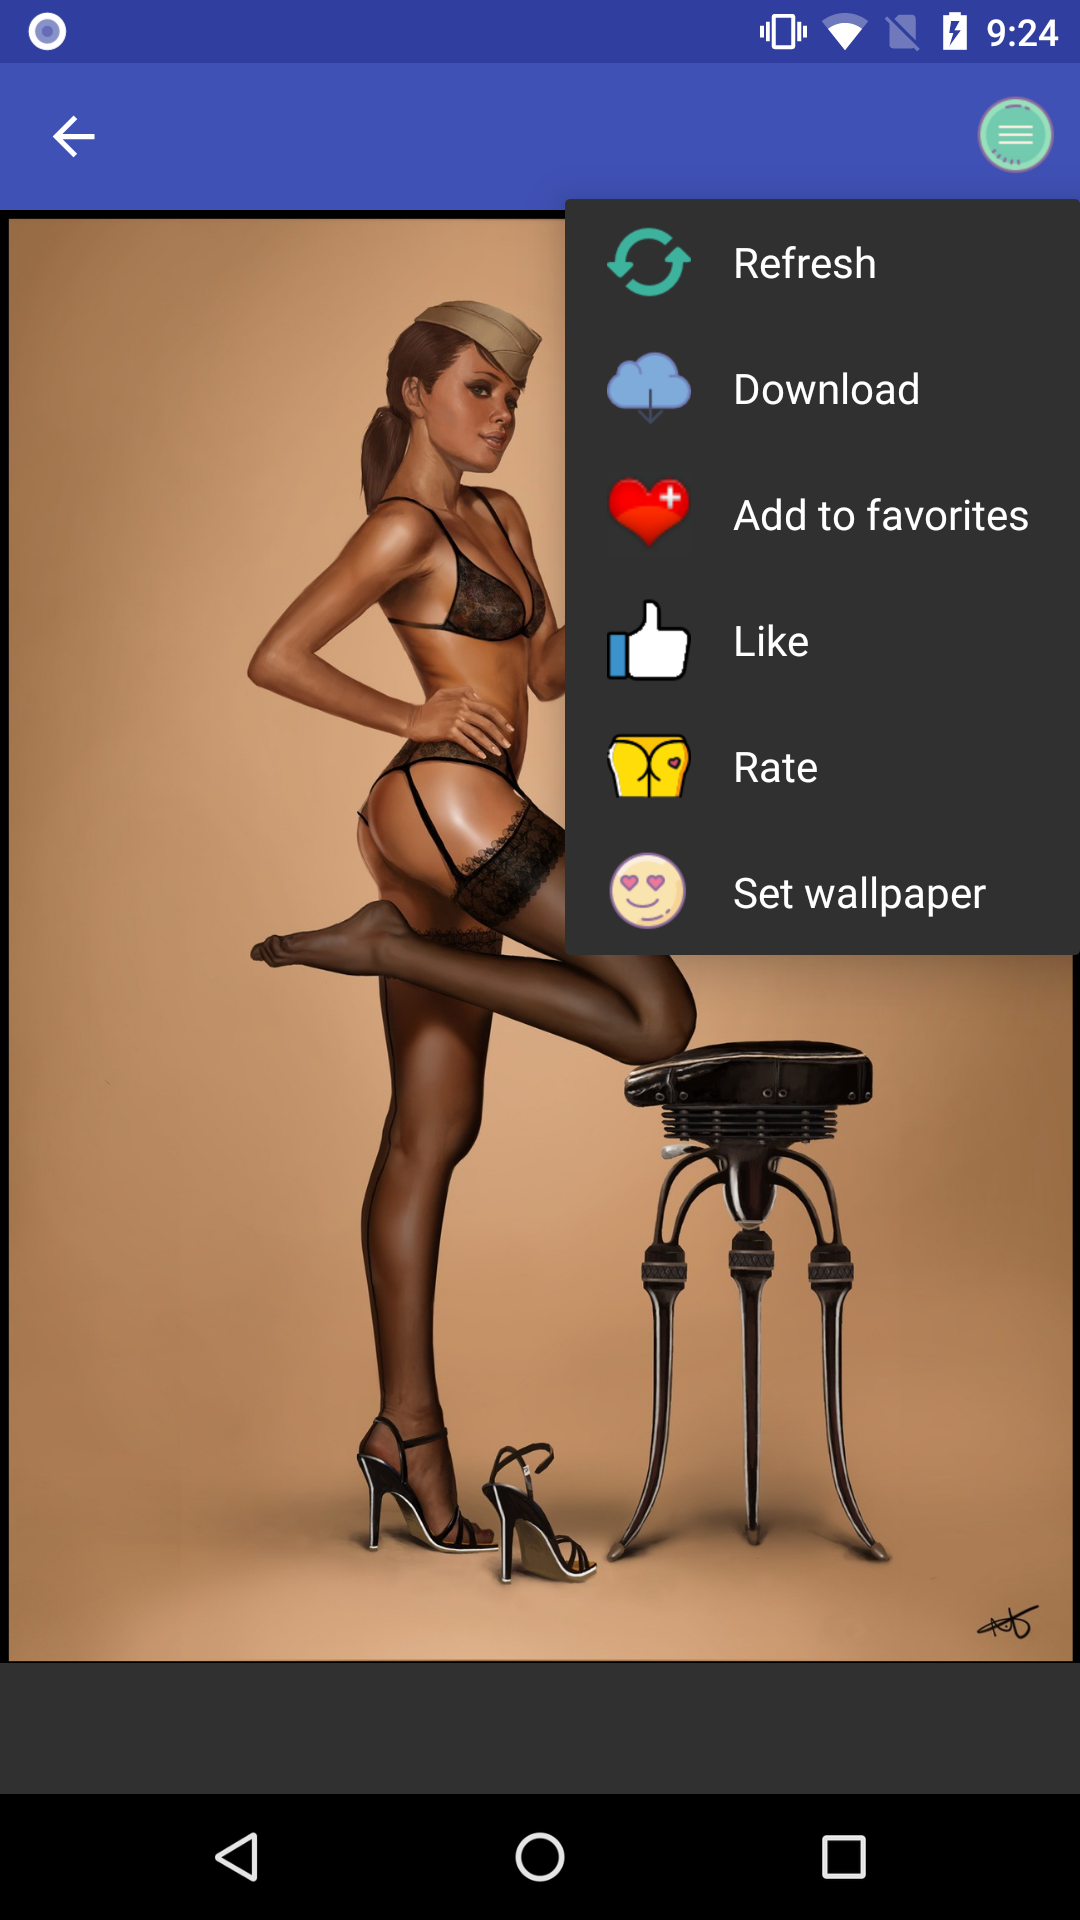 Pinup Wallpapers apps,picture,android,for,hentai,girls,gay,baixar,app,gallery,backgrounds,sexgalleries,pics,pinup,wallpapers,download,application,apk,photos,sexy,star,hentay,pictures,porn